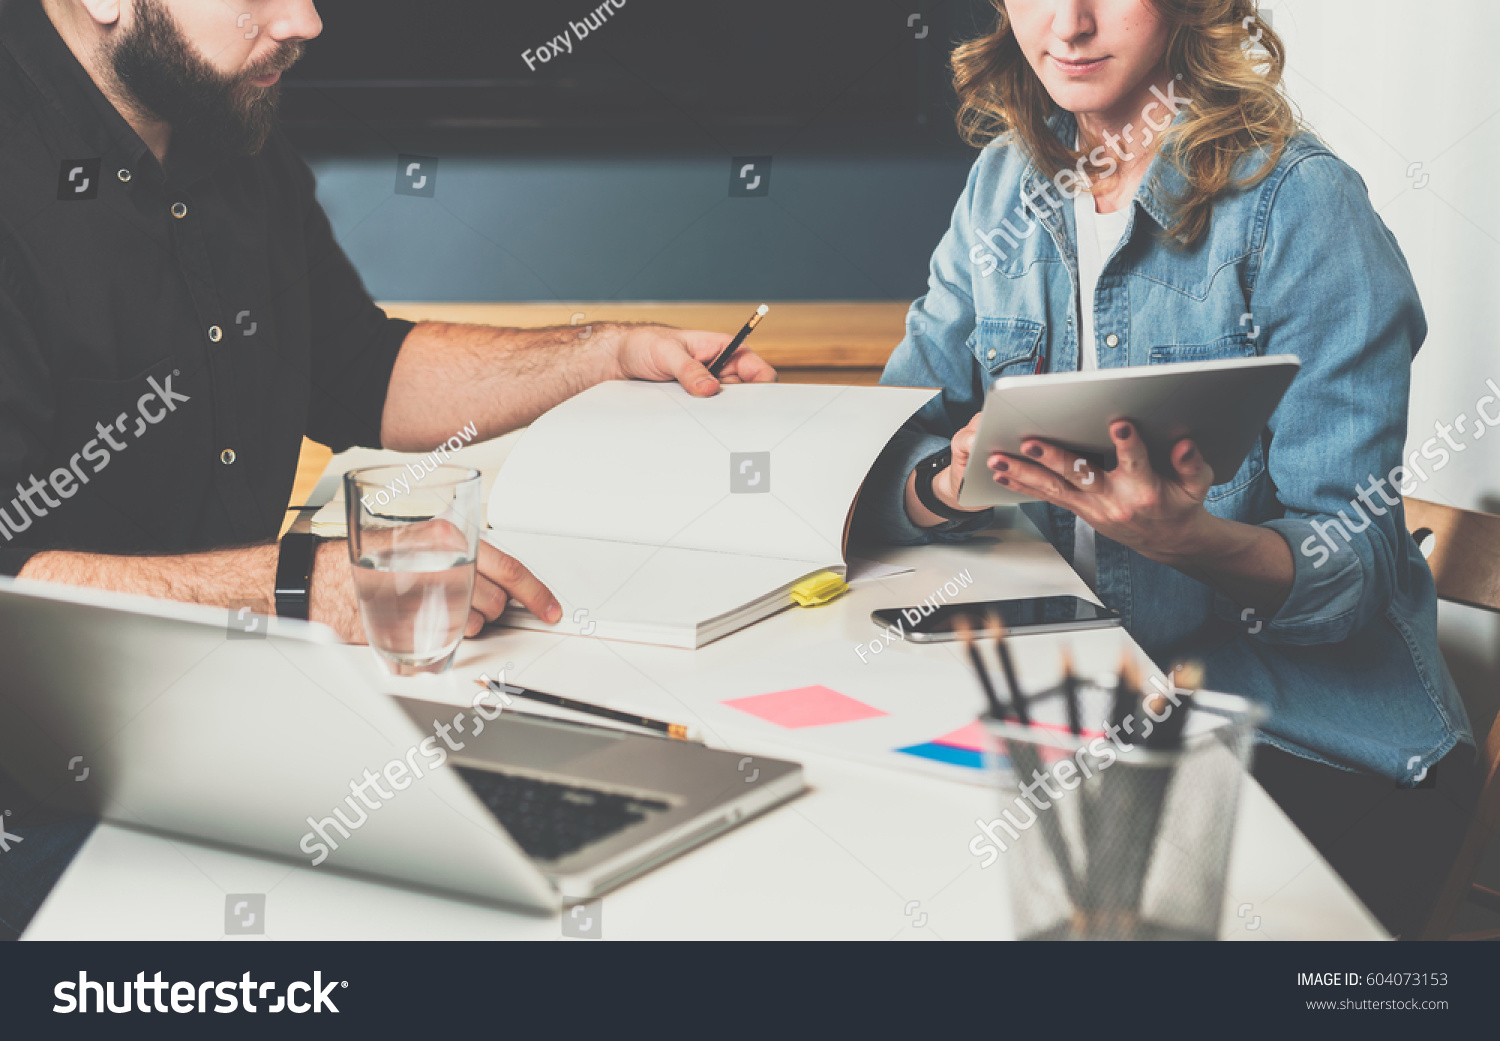 Meet one-on-one. Business meeting. Teamwork. Businessman and businesswoman sitting at table. Woman uses a Tablet PC,man looking catalog.On table is laptop, smartphone,stationery. Freelancers working. #604073153